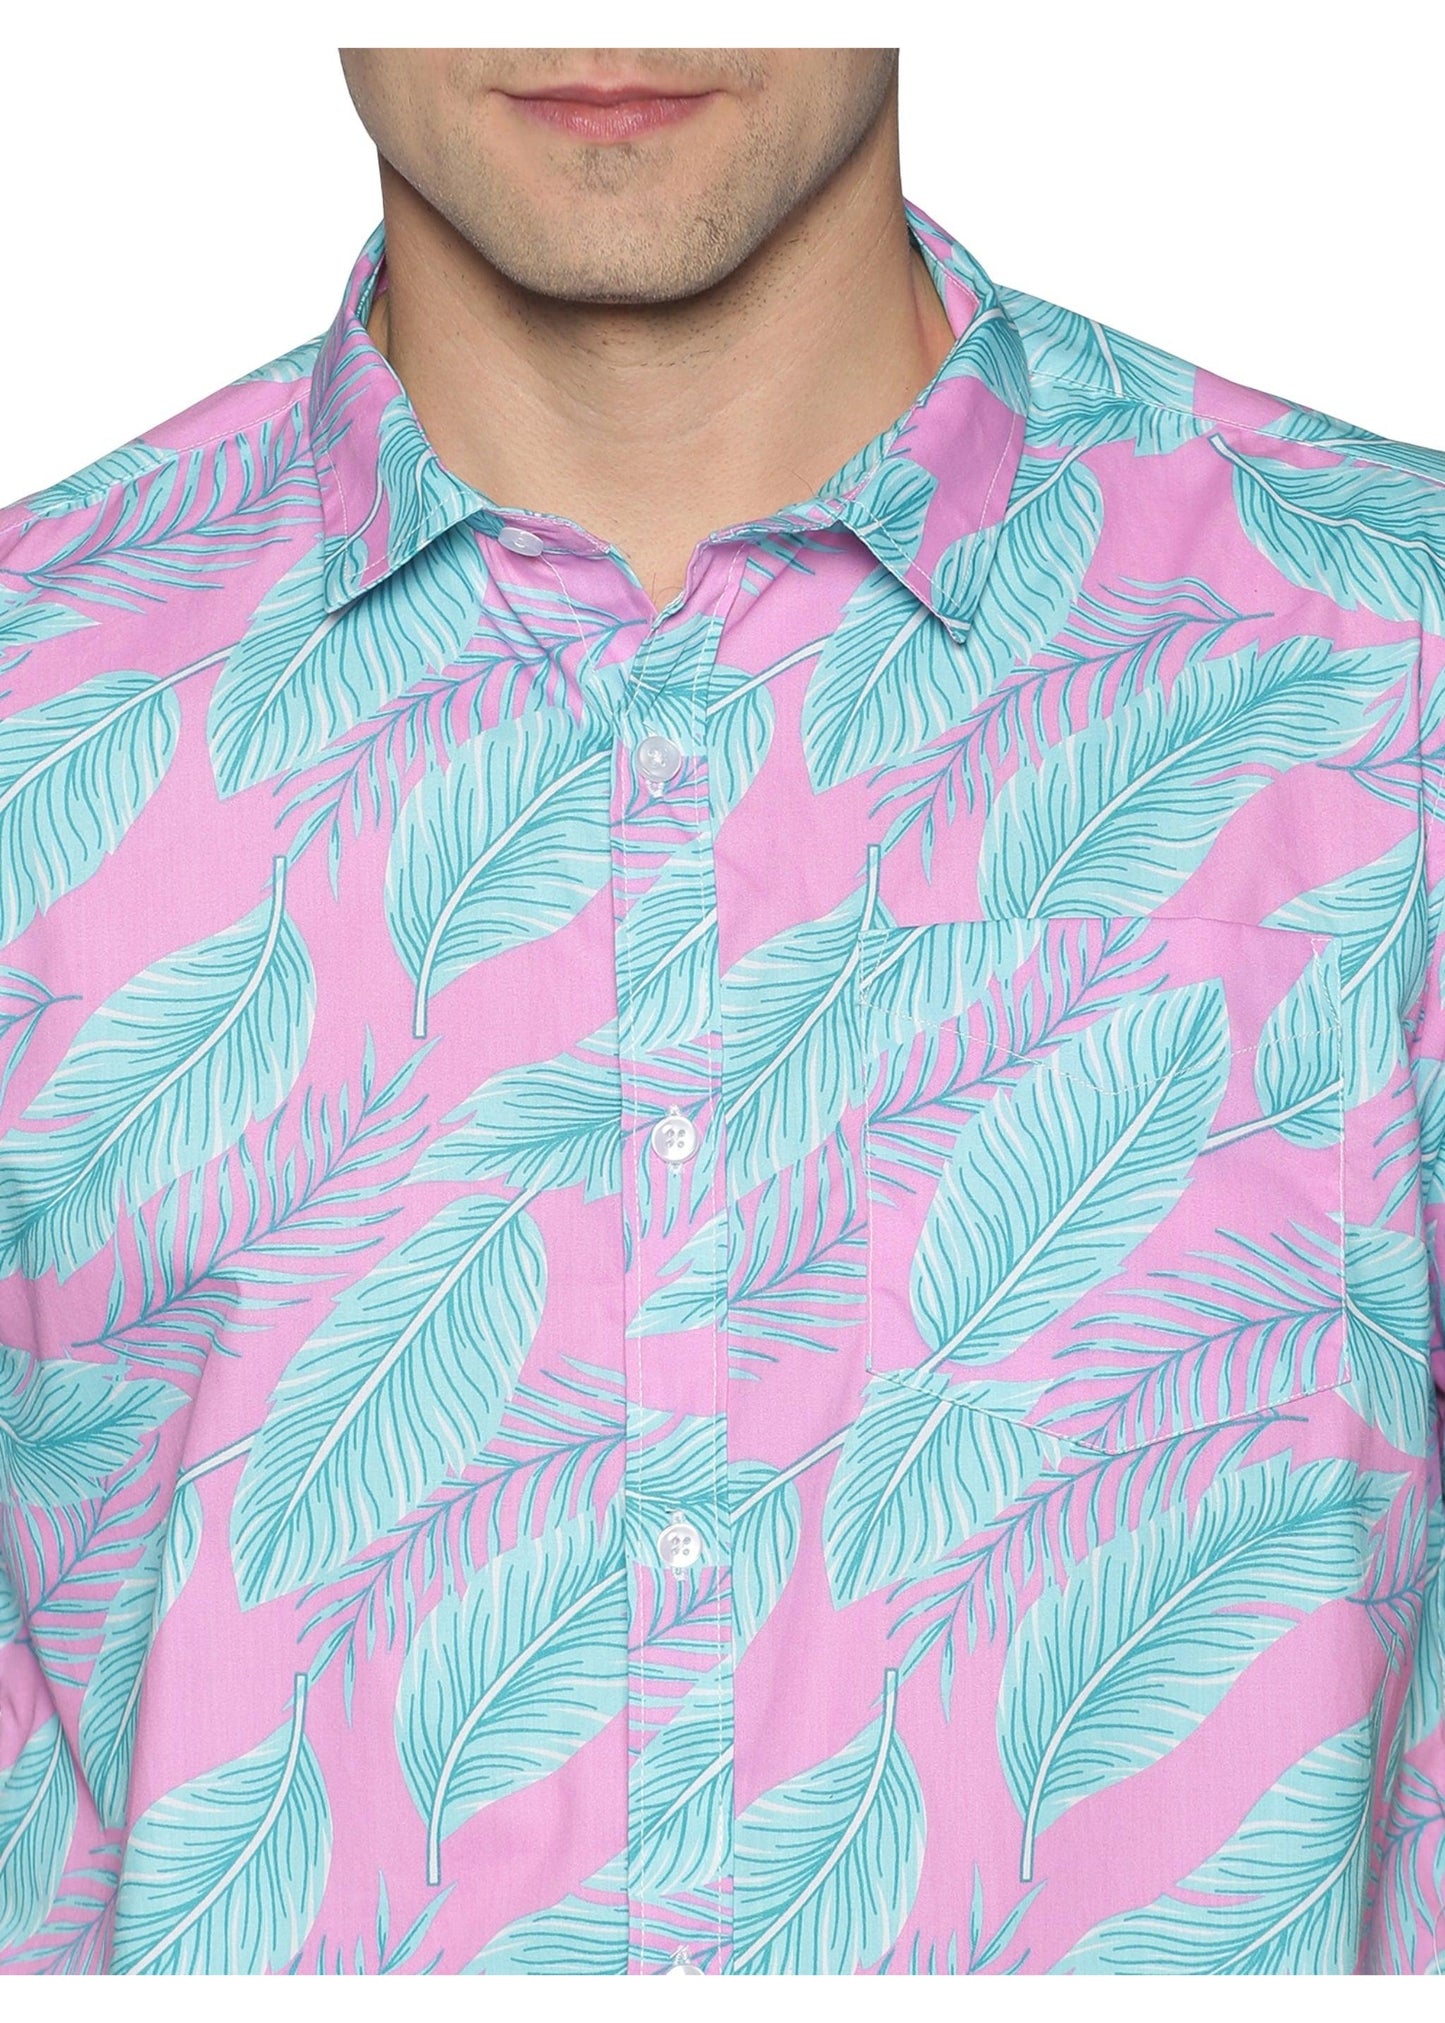 Feather Printed Shirt